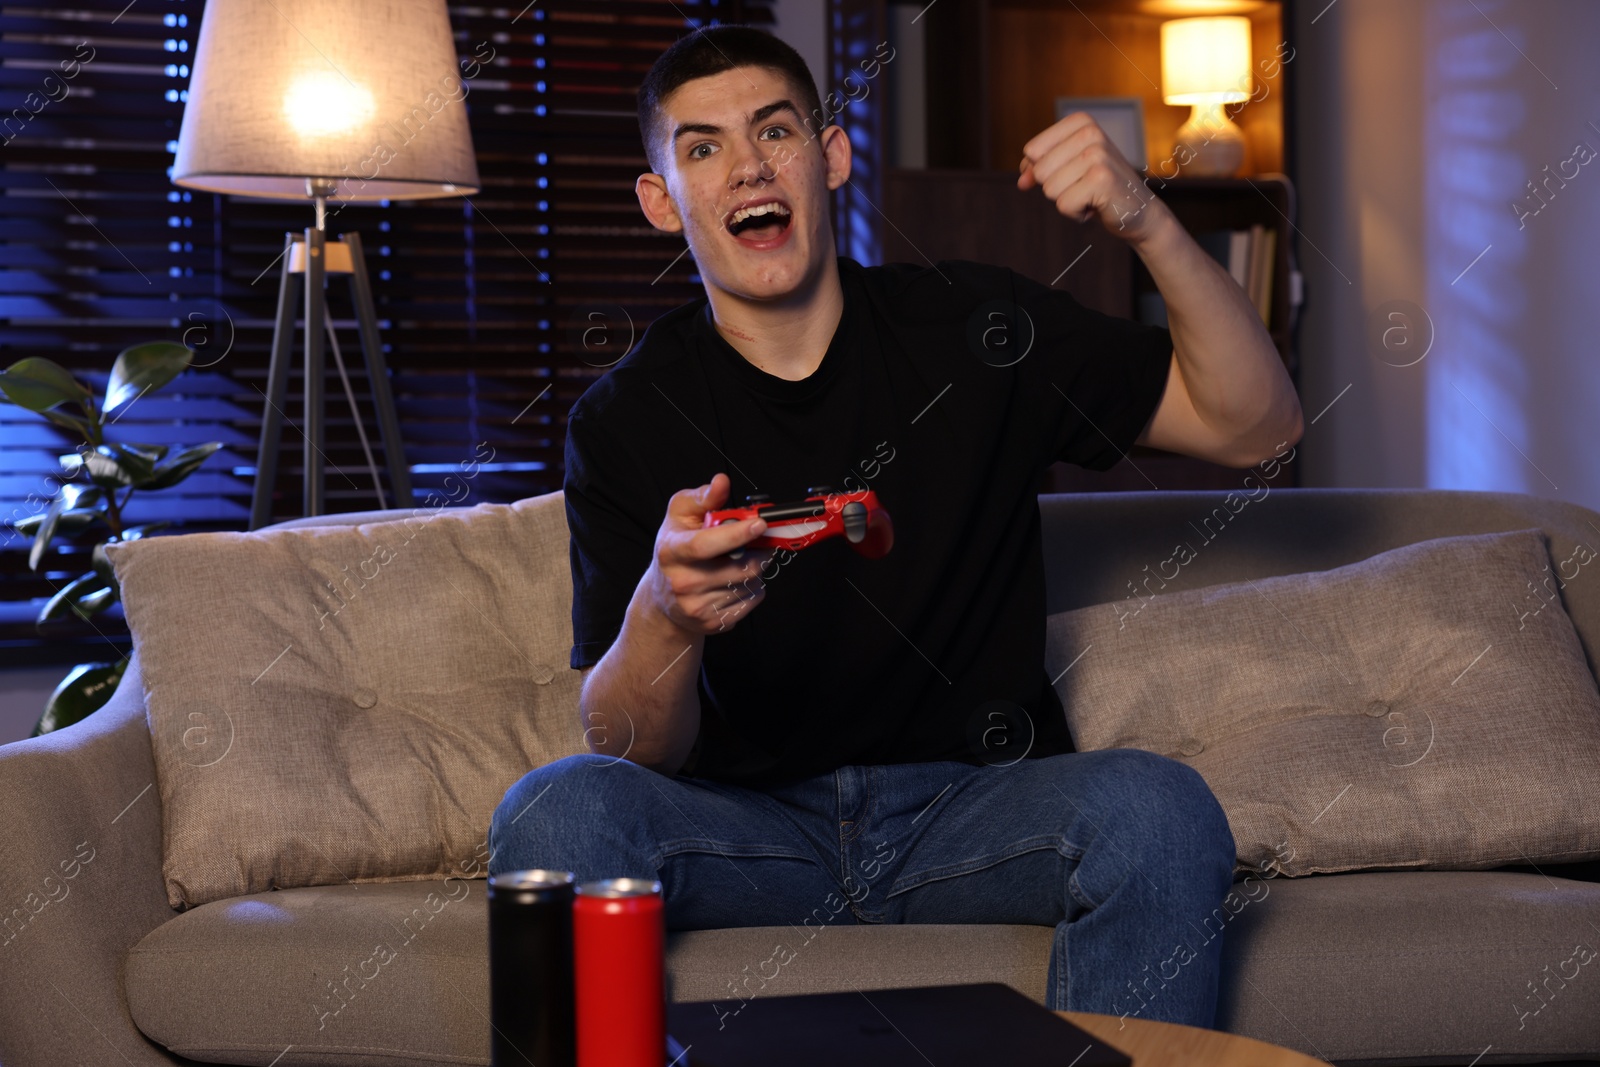 Photo of Emotional man playing video games with controller at home